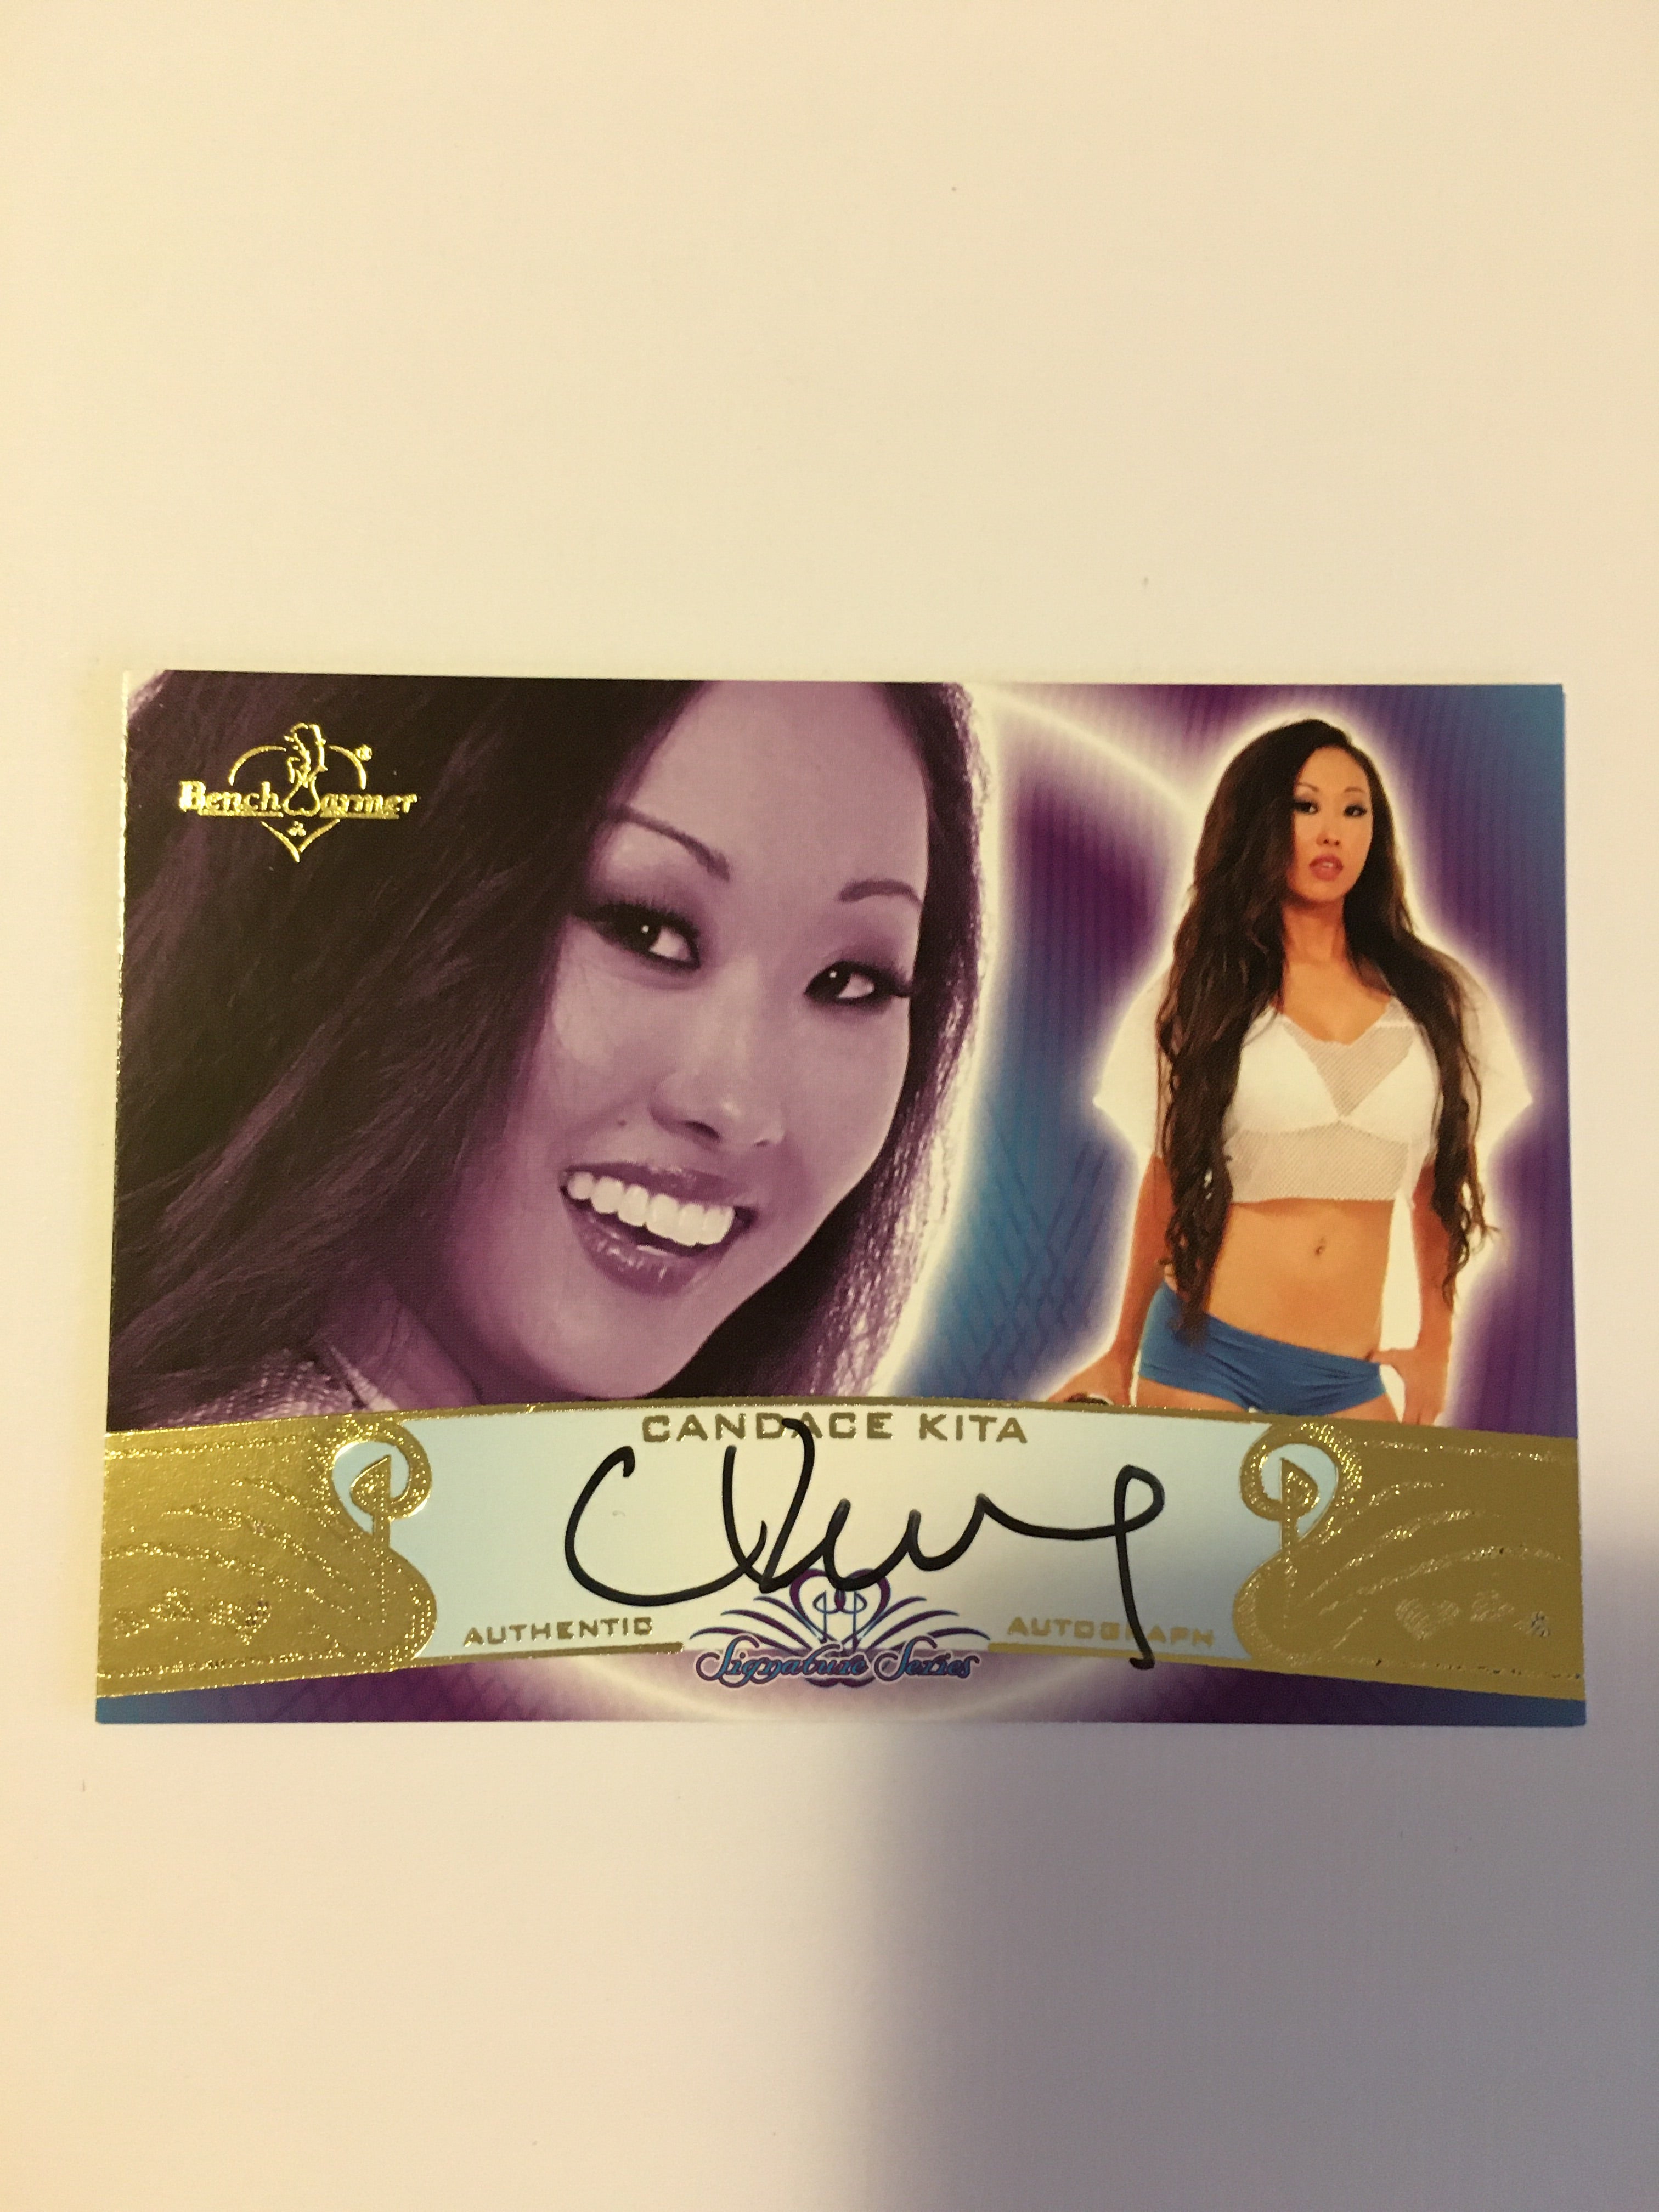 Candace Kita - Autographed Benchwarmer Trading Card (1)